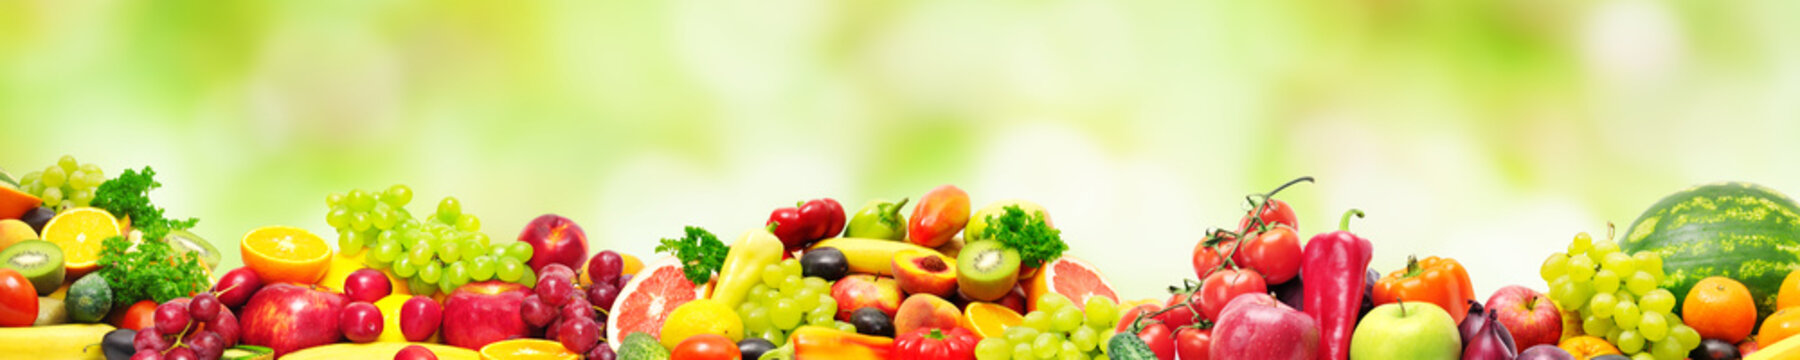 Panoramic collection fresh fruits and vegetables for skinali on blur green background.